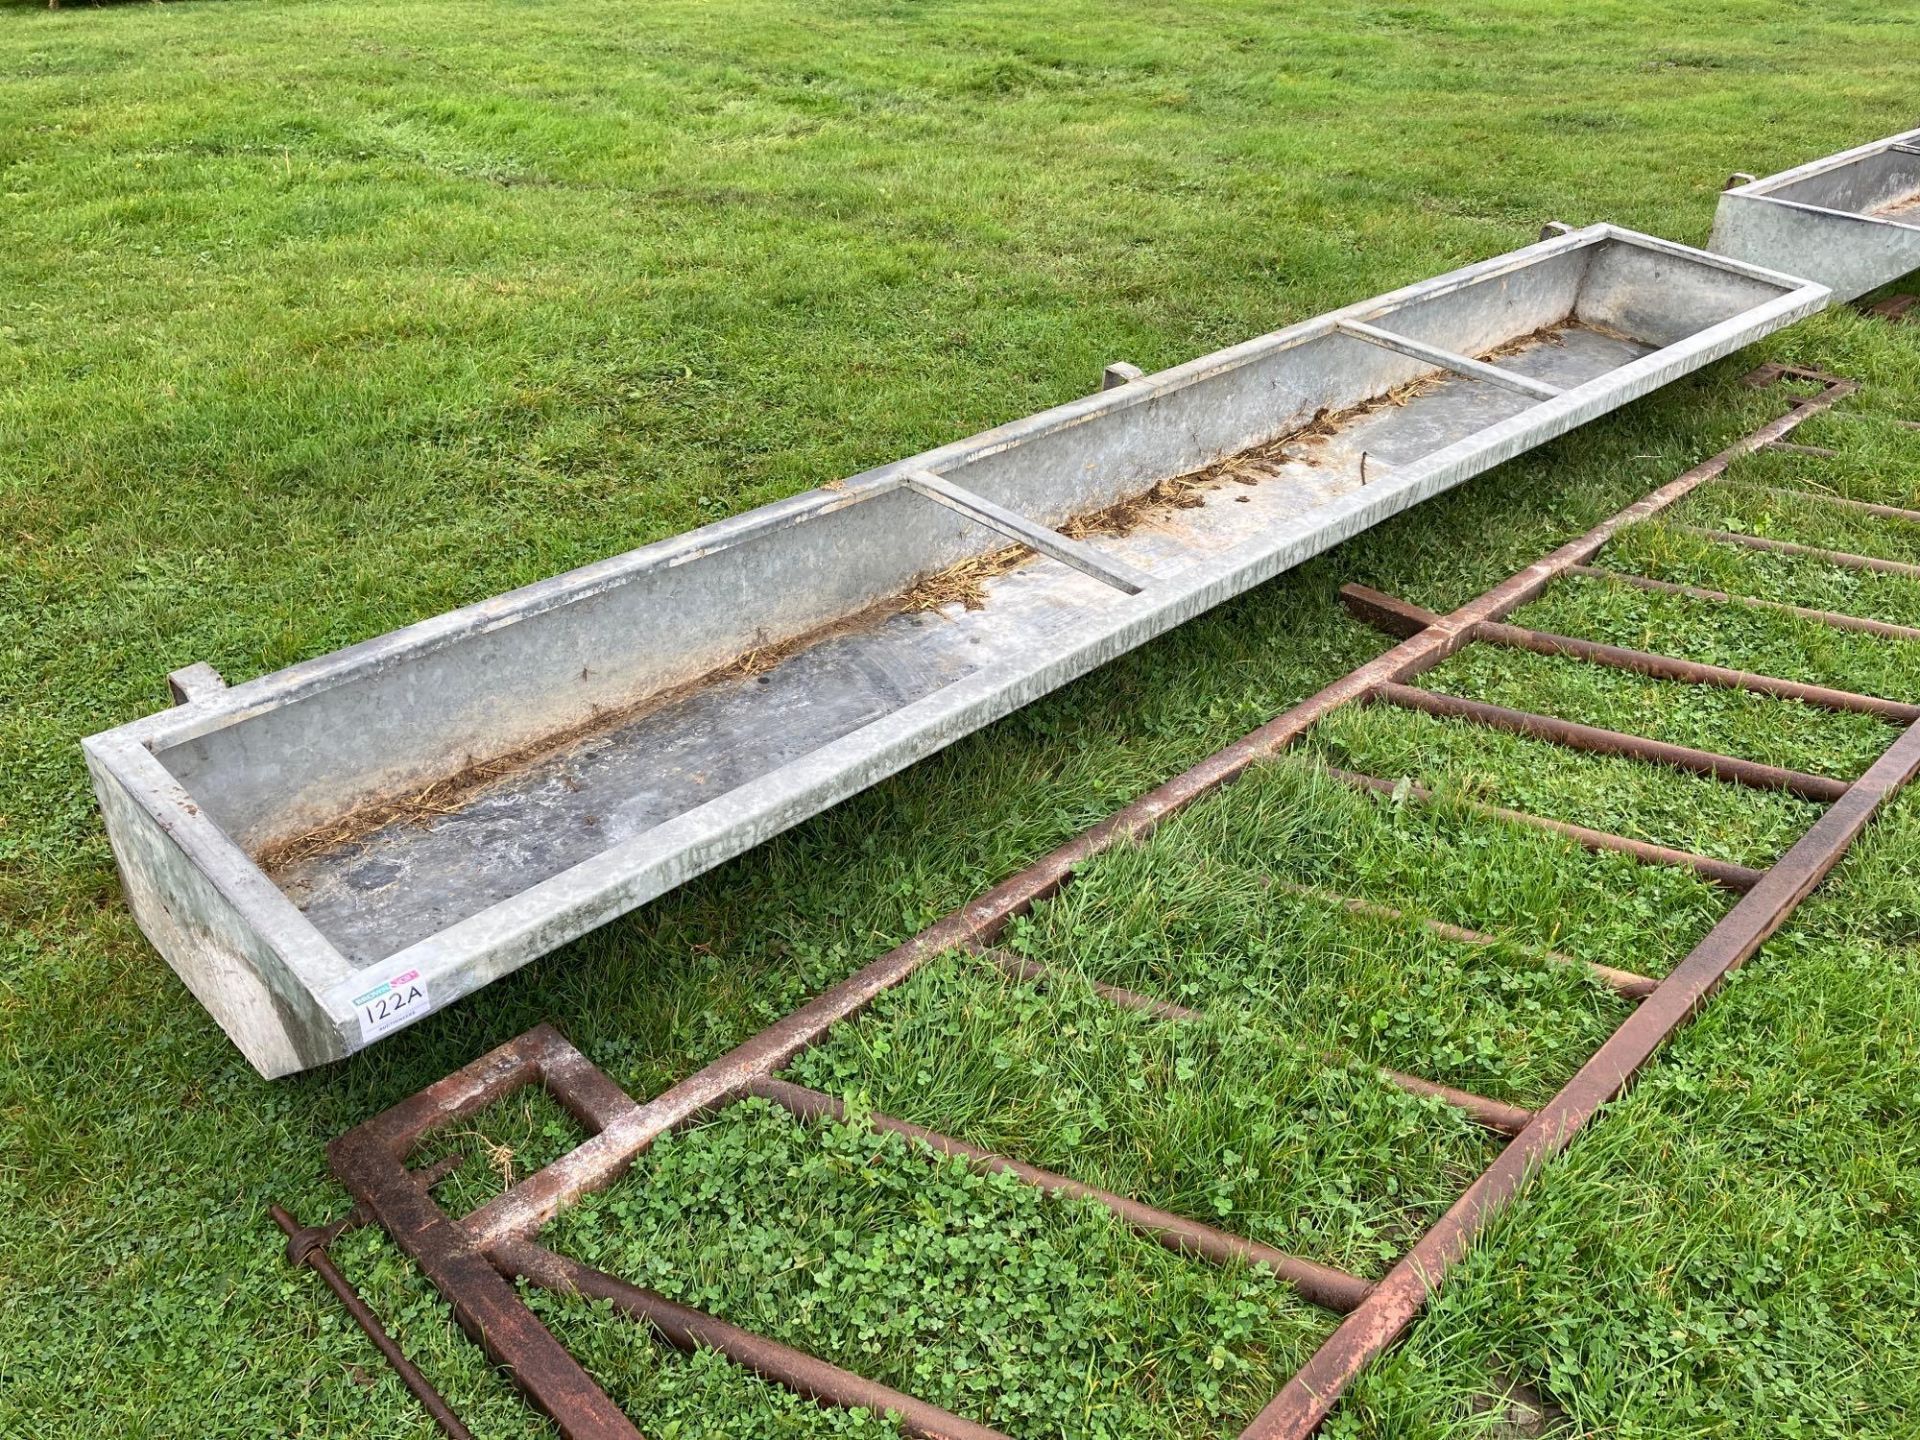 Galvanised 14ft feed trough. NB: Barrier not included